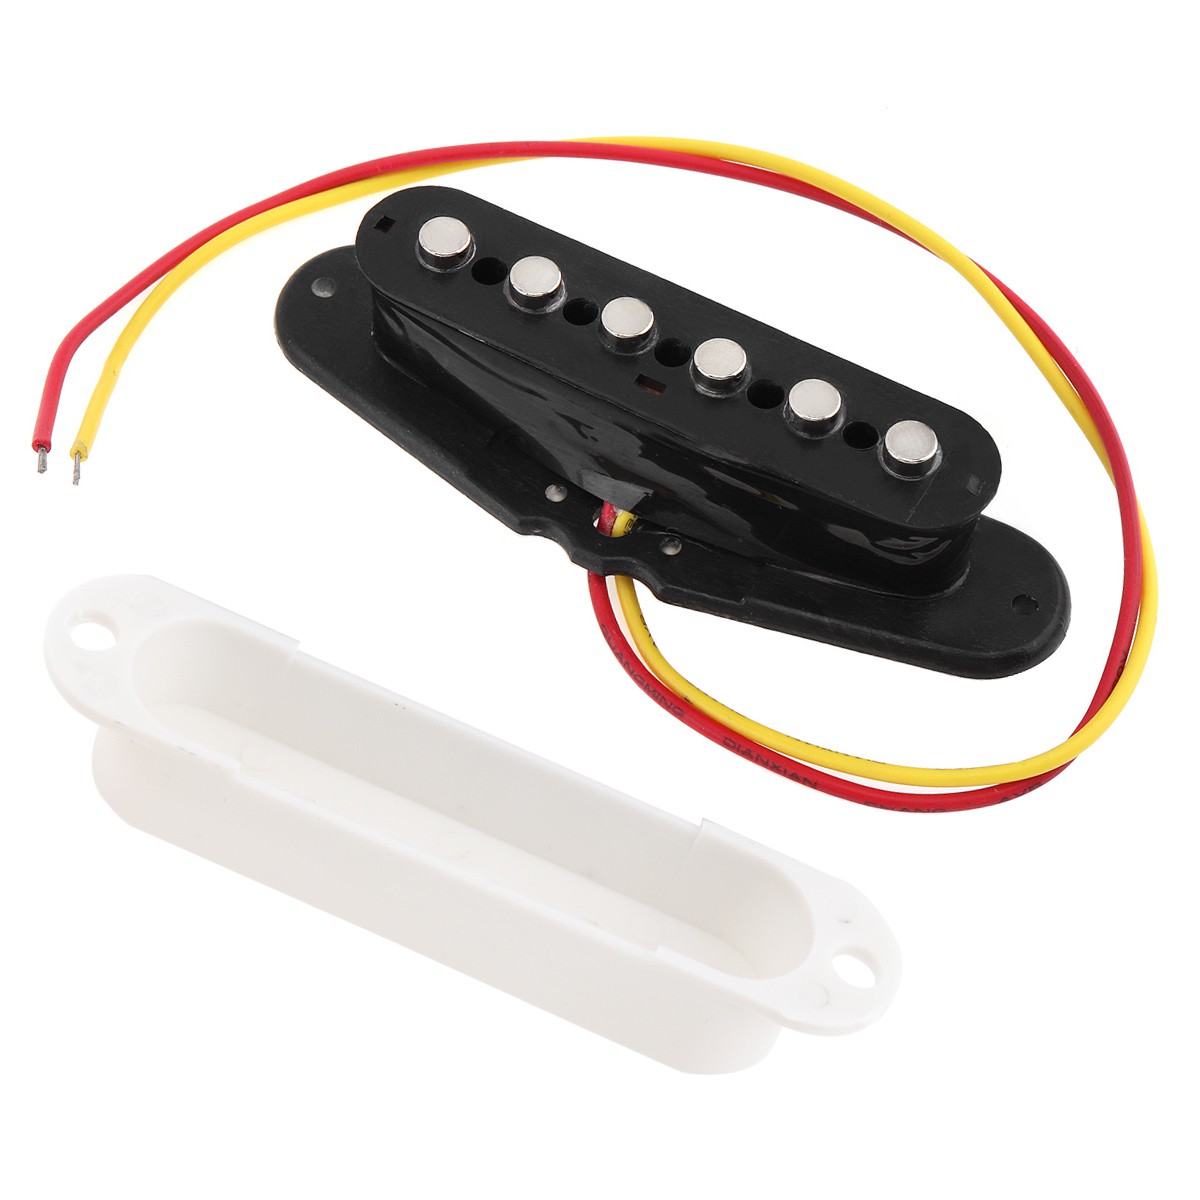 1PC Single Coil Sound Hole Pickup for ST SQ 6 Strings Electric Guitar Harmonious